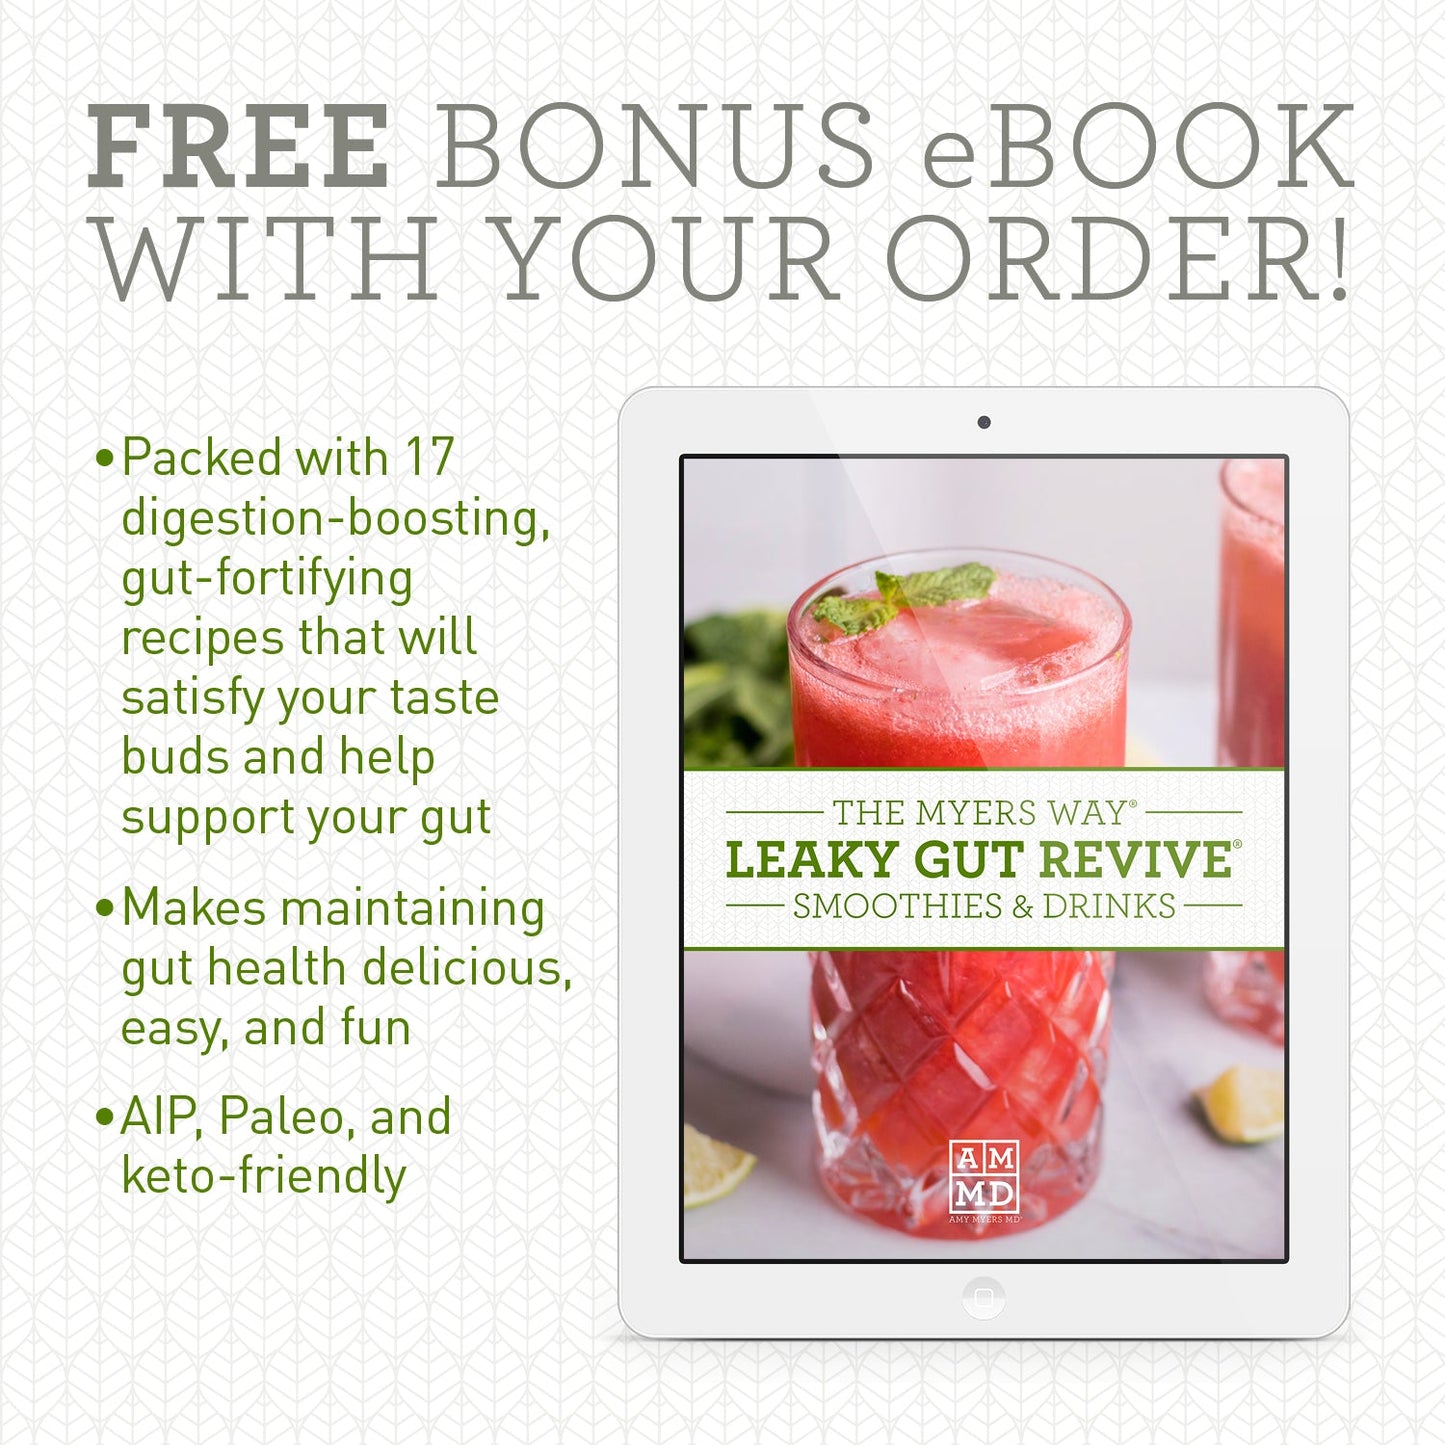 Leaky Gut Revive by Amy Myers MD